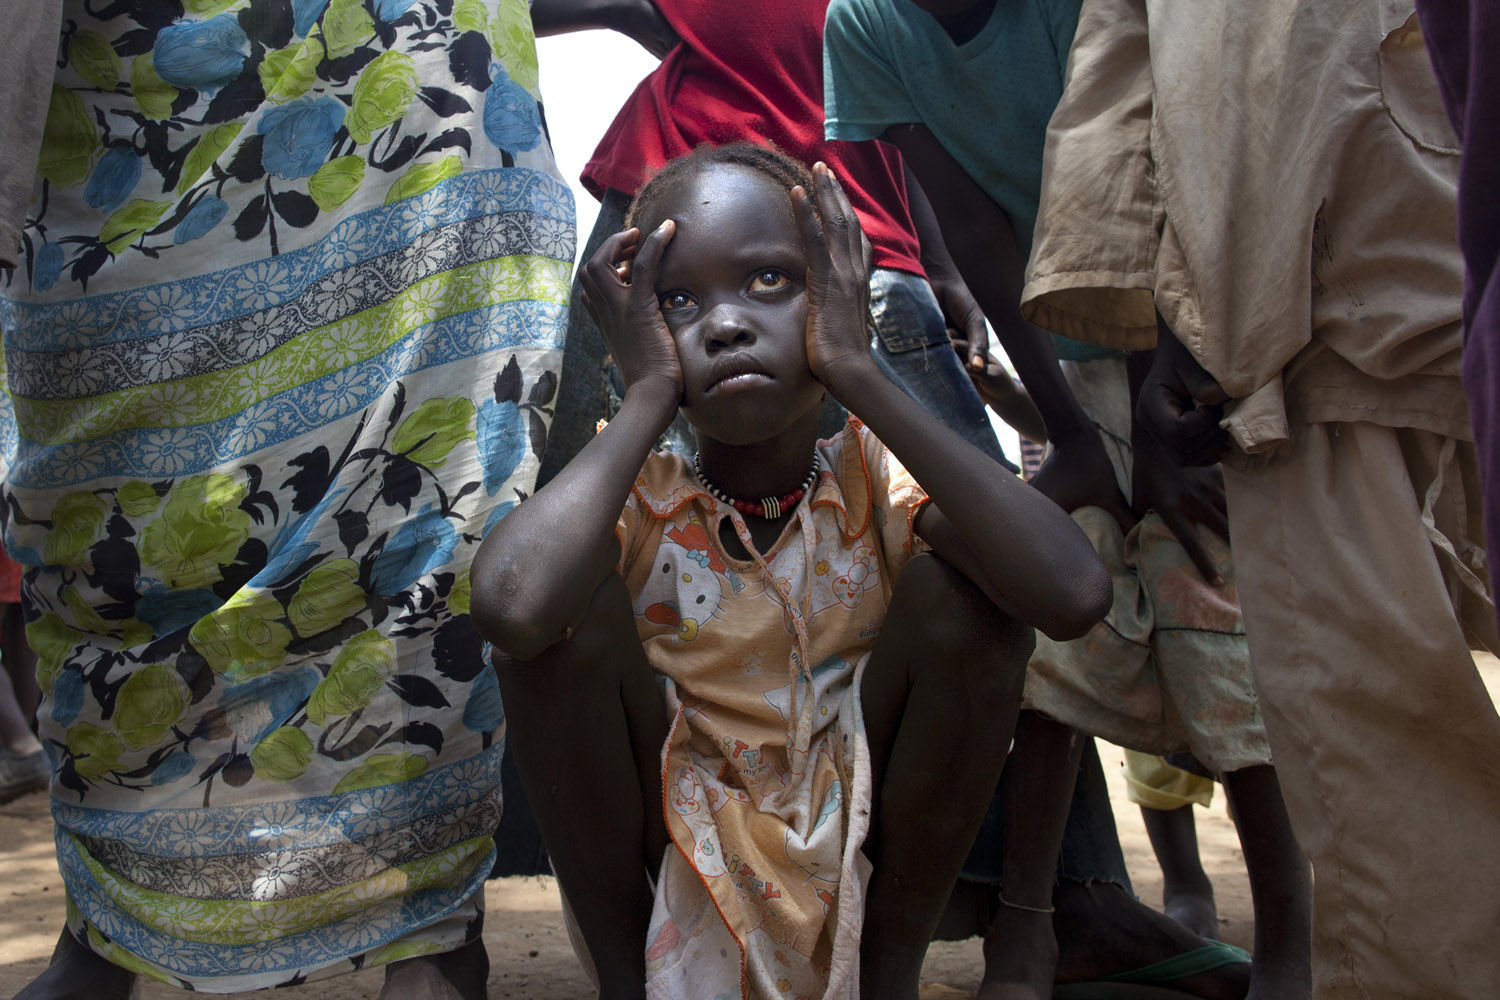 July 16, 2012. A sick Sudanese girl waits for transport to the MSF field hospital in the Jamam refugee camp, South Sudan.